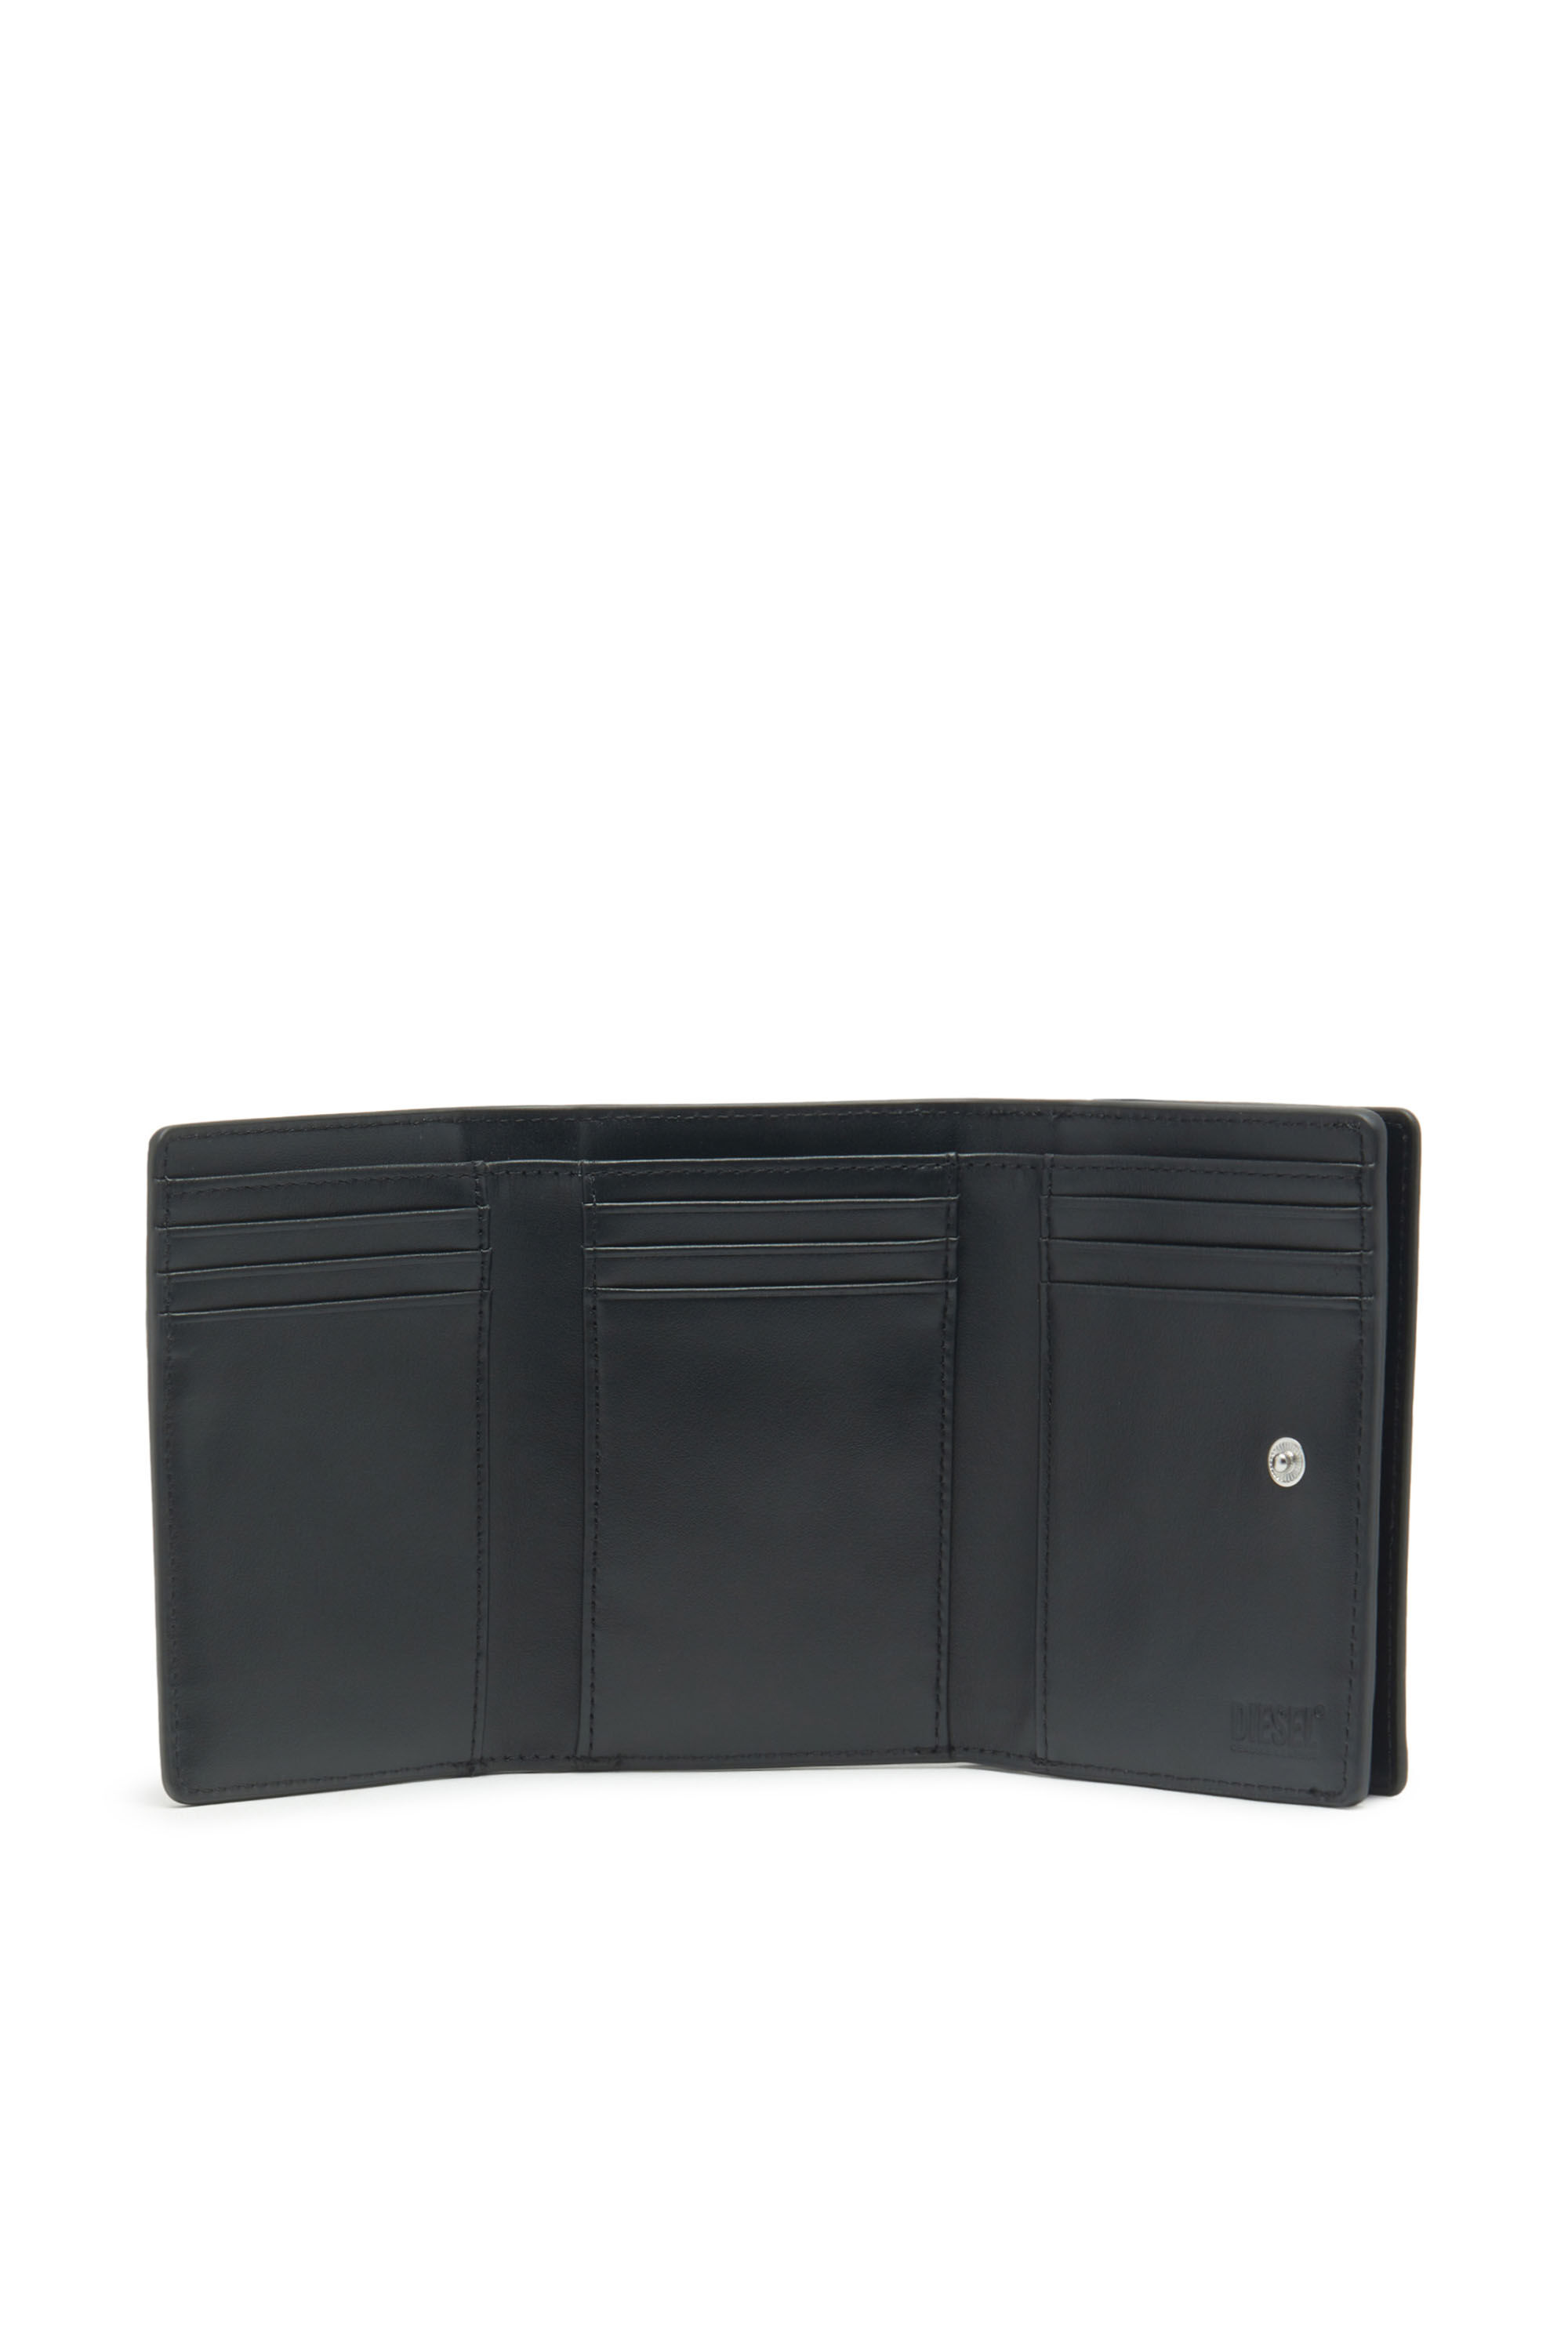 Men's Tri-fold wallet in textured leather | Diesel TRI-FOLD COIN